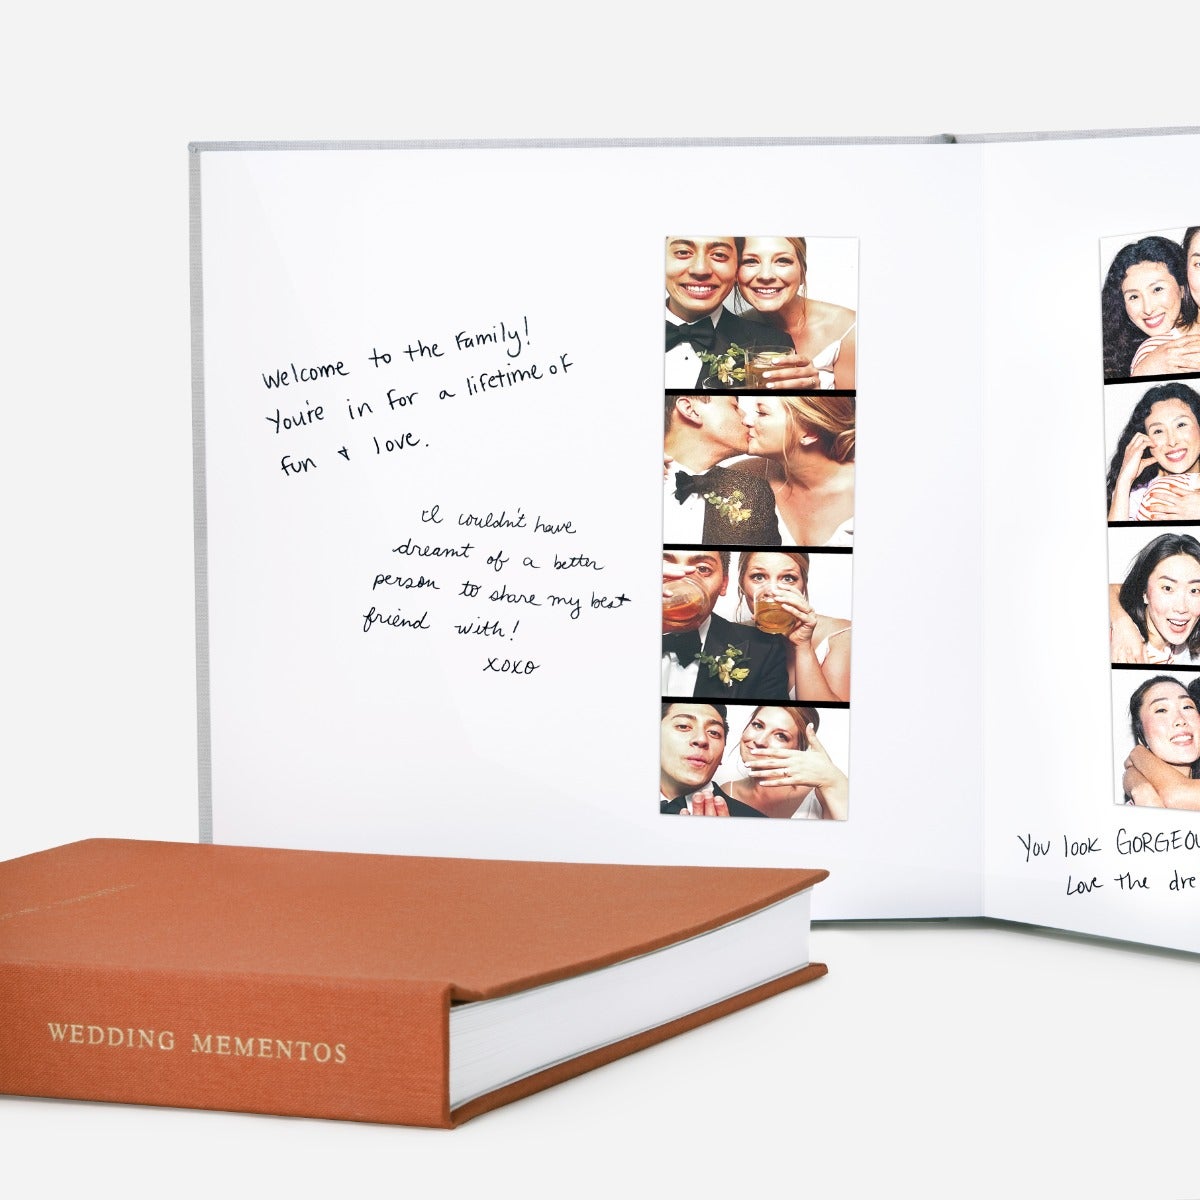 How To Guide for Your Polaroid Guest Book! Such a creative & fun add o